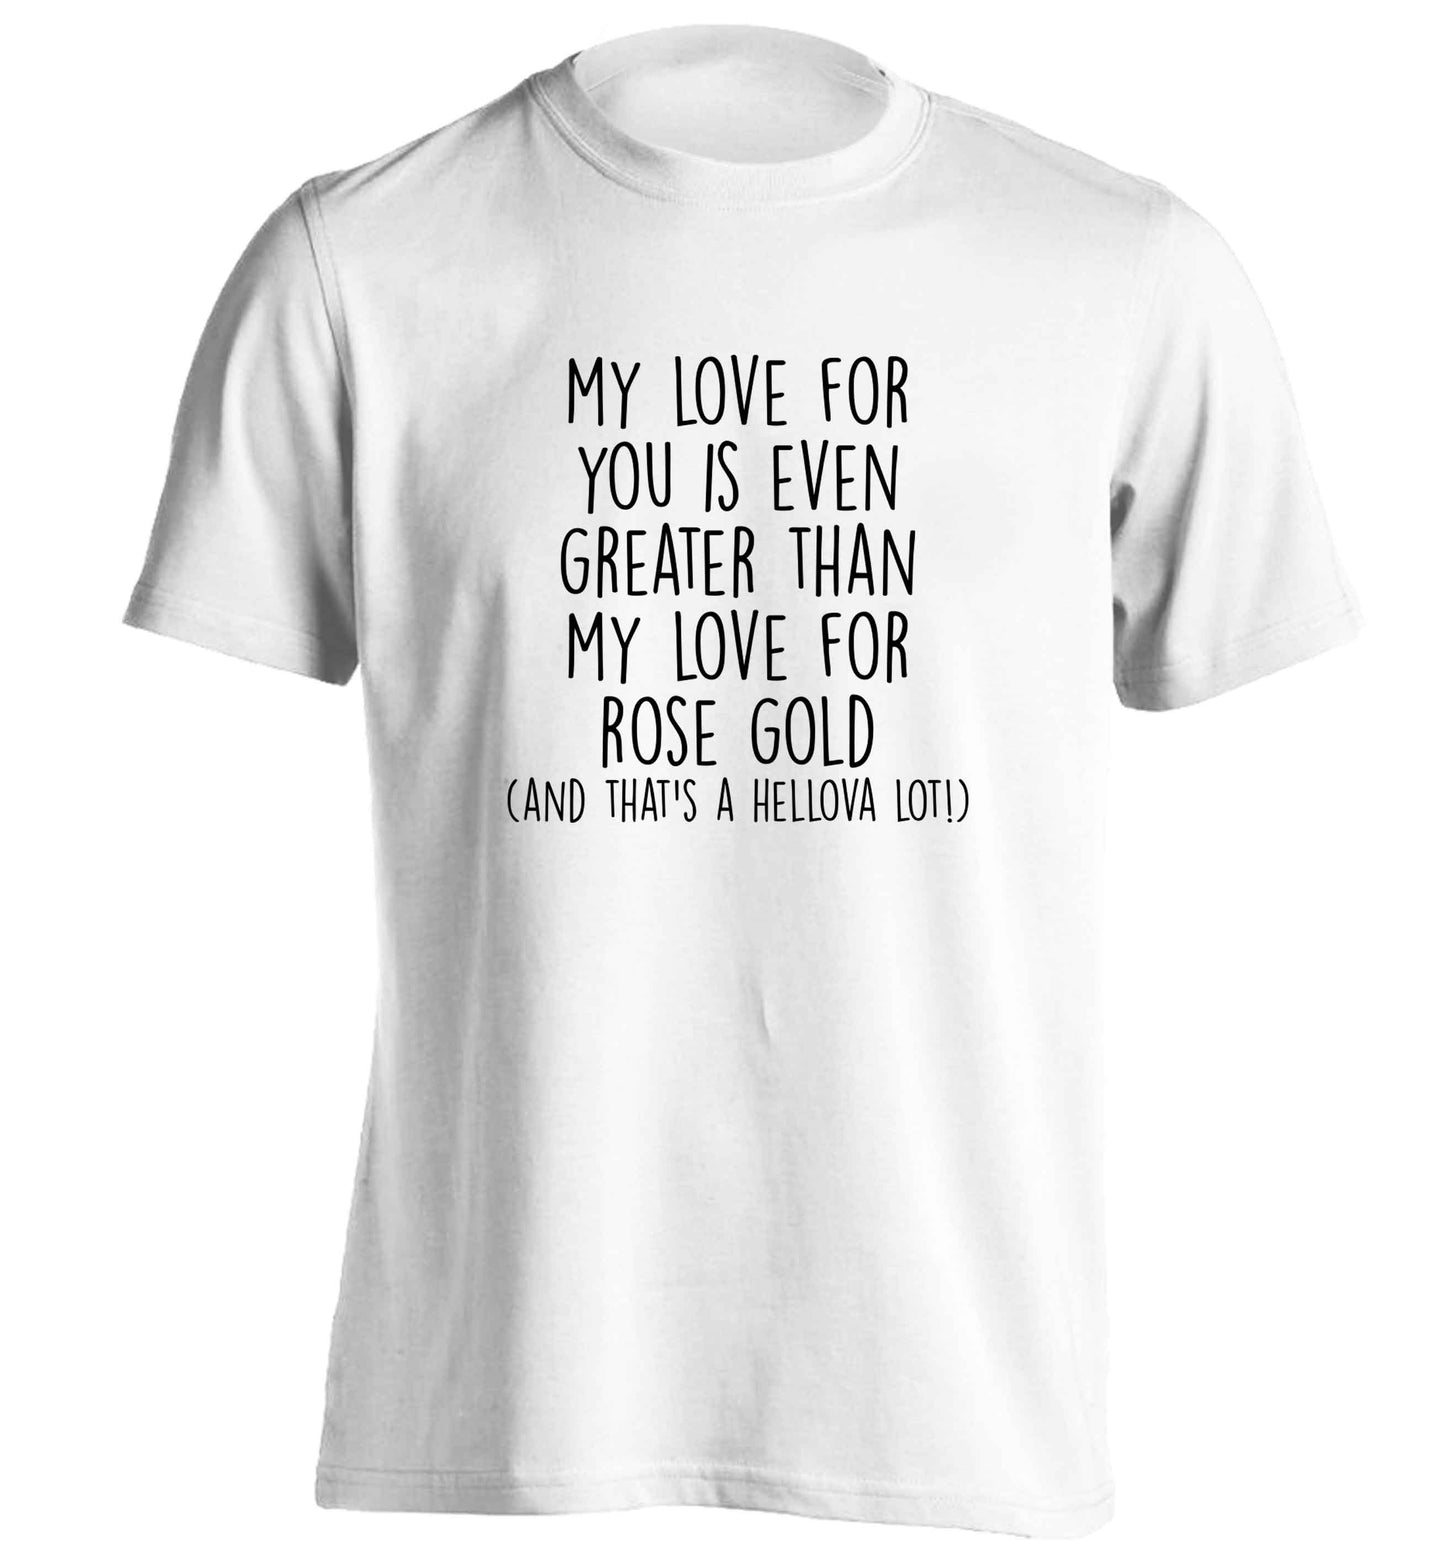 My love for you is even greater than my love for rose gold (and that's a hellova lot) adults unisex white Tshirt 2XL